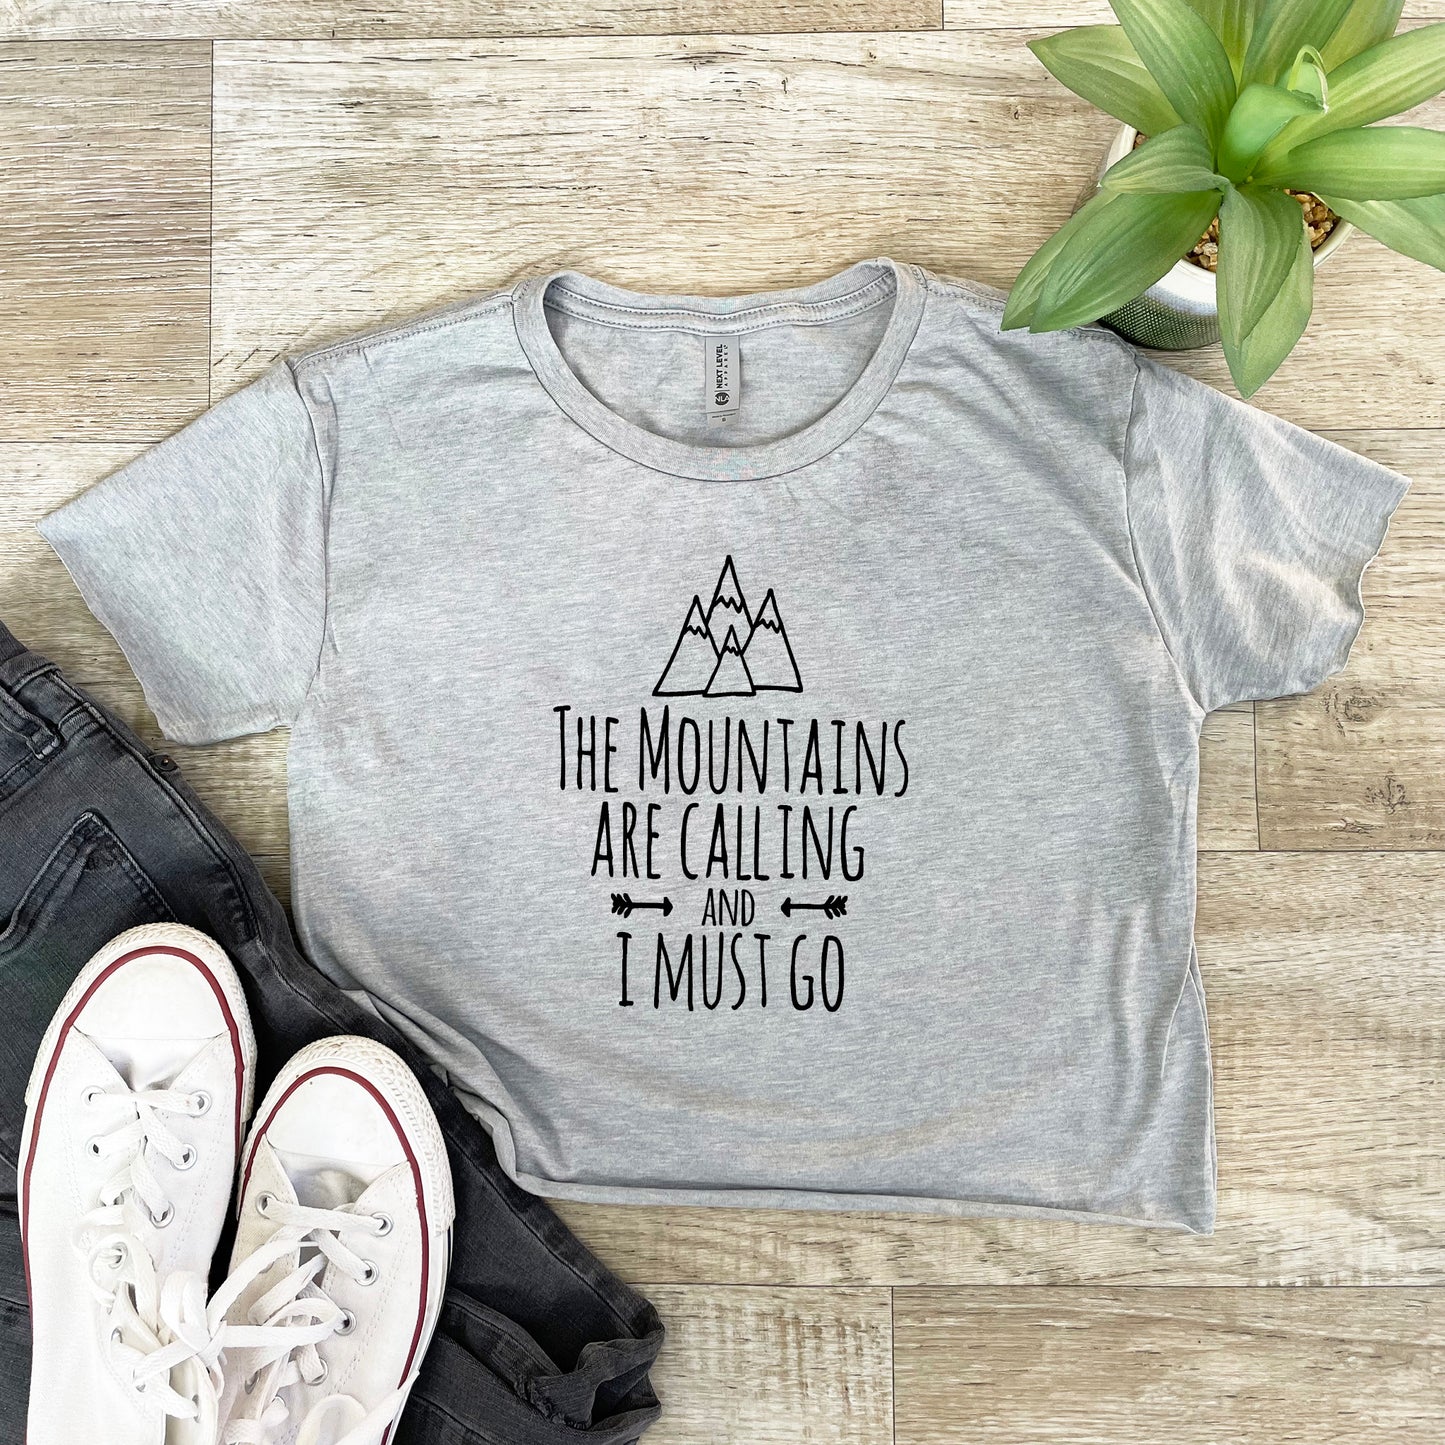 The Mountains Are Calling And I Must Go - Women's Crop Tee - Heather Gray or Gold